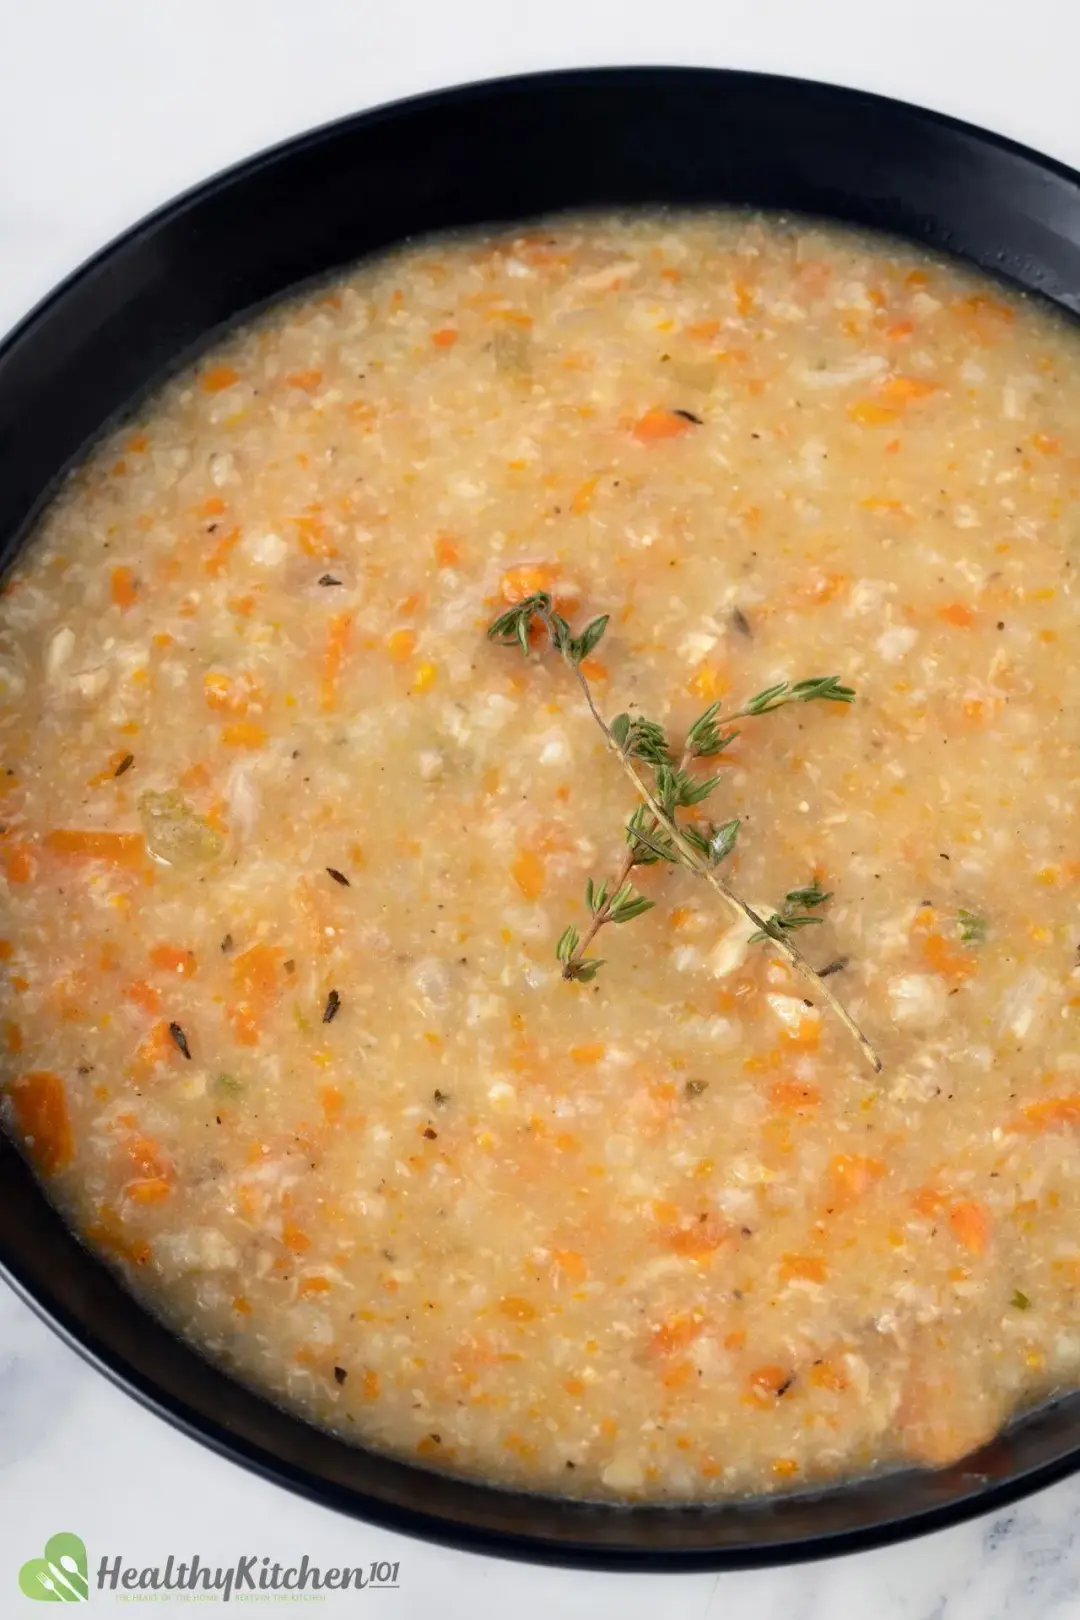 A bowl of chicken and rice soup filled with carrot pieces and topped with rosemary sprigs